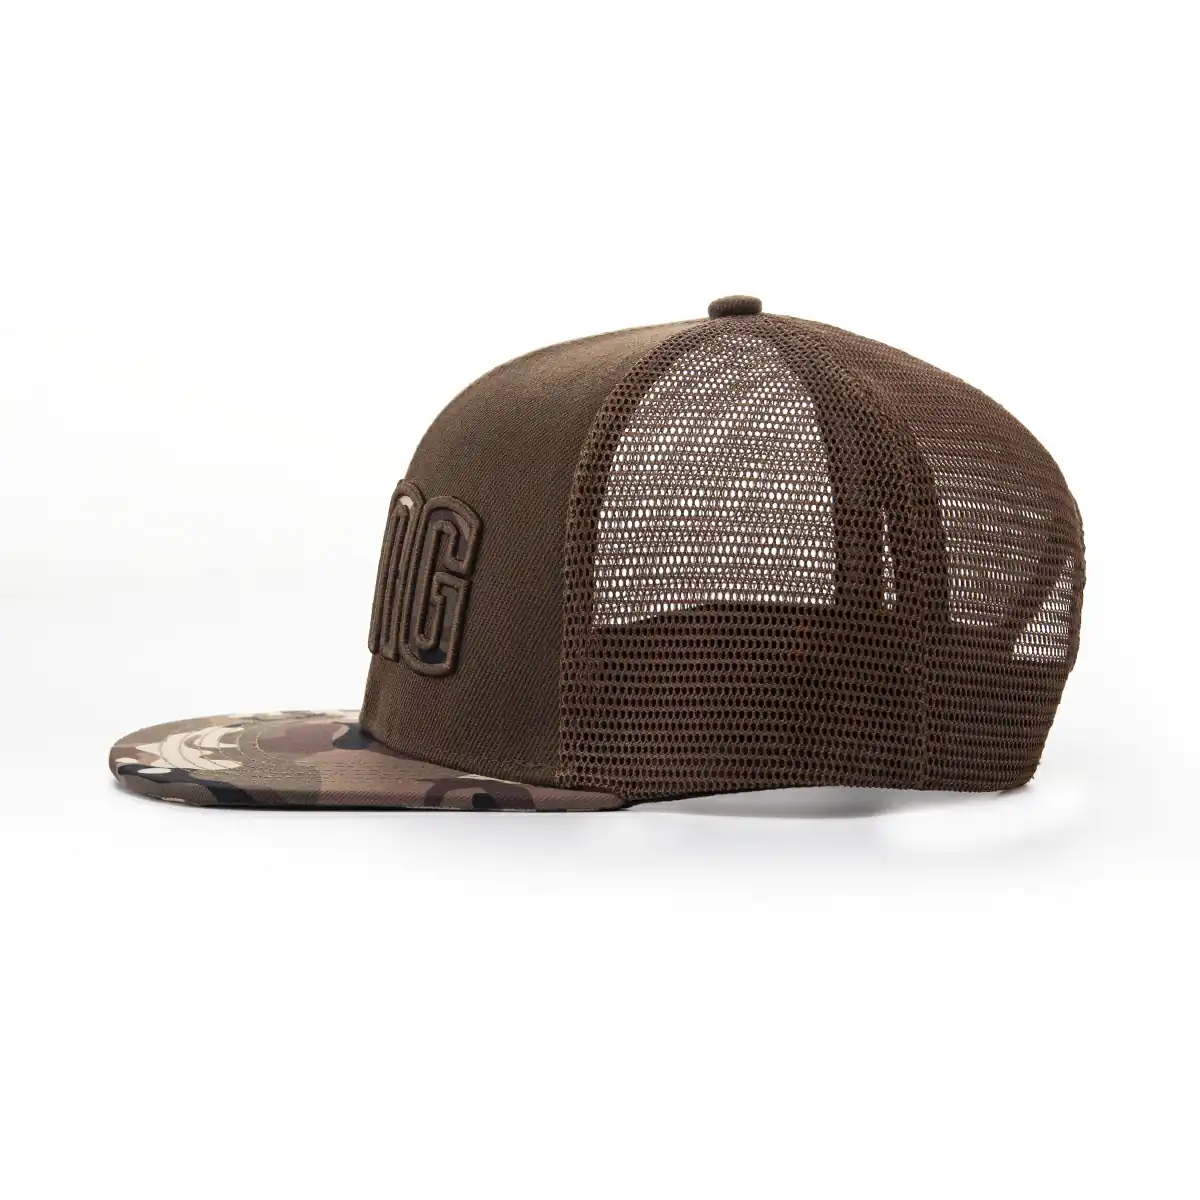 Aung Crown mens mesh trucker hat for outdoors with a flat brim SFG-210420-3